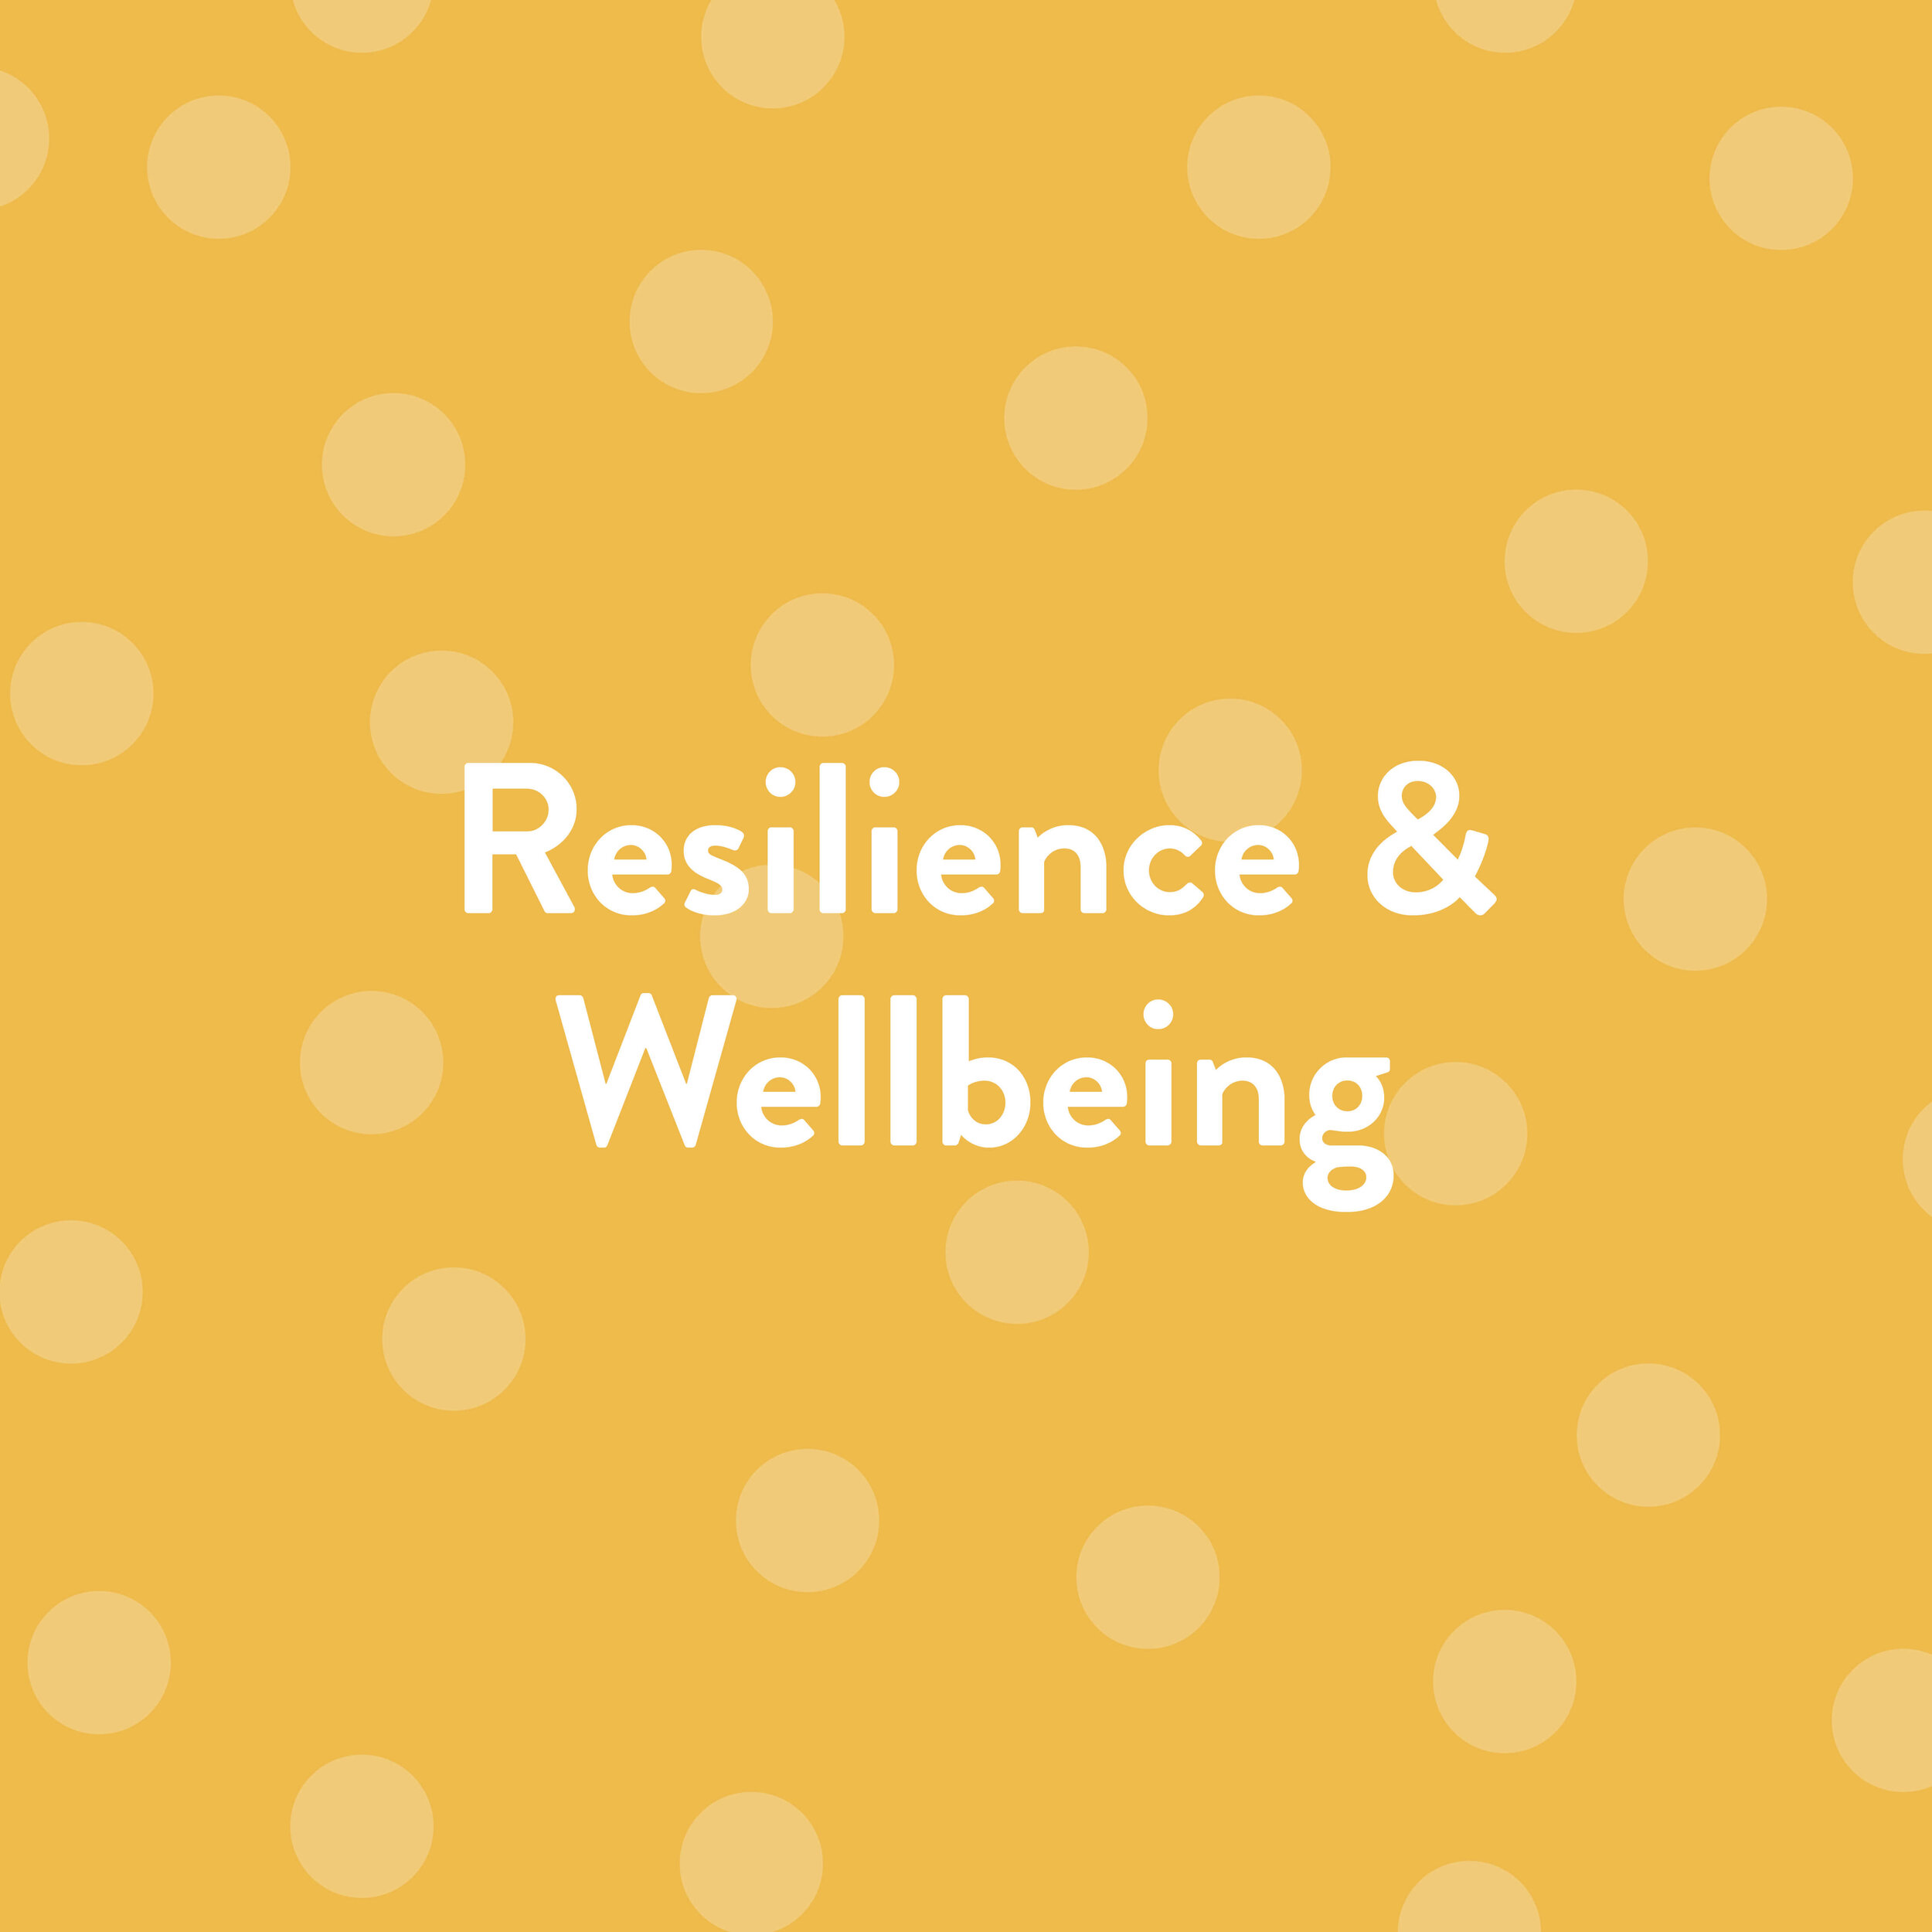 Resilience & Wellbeing